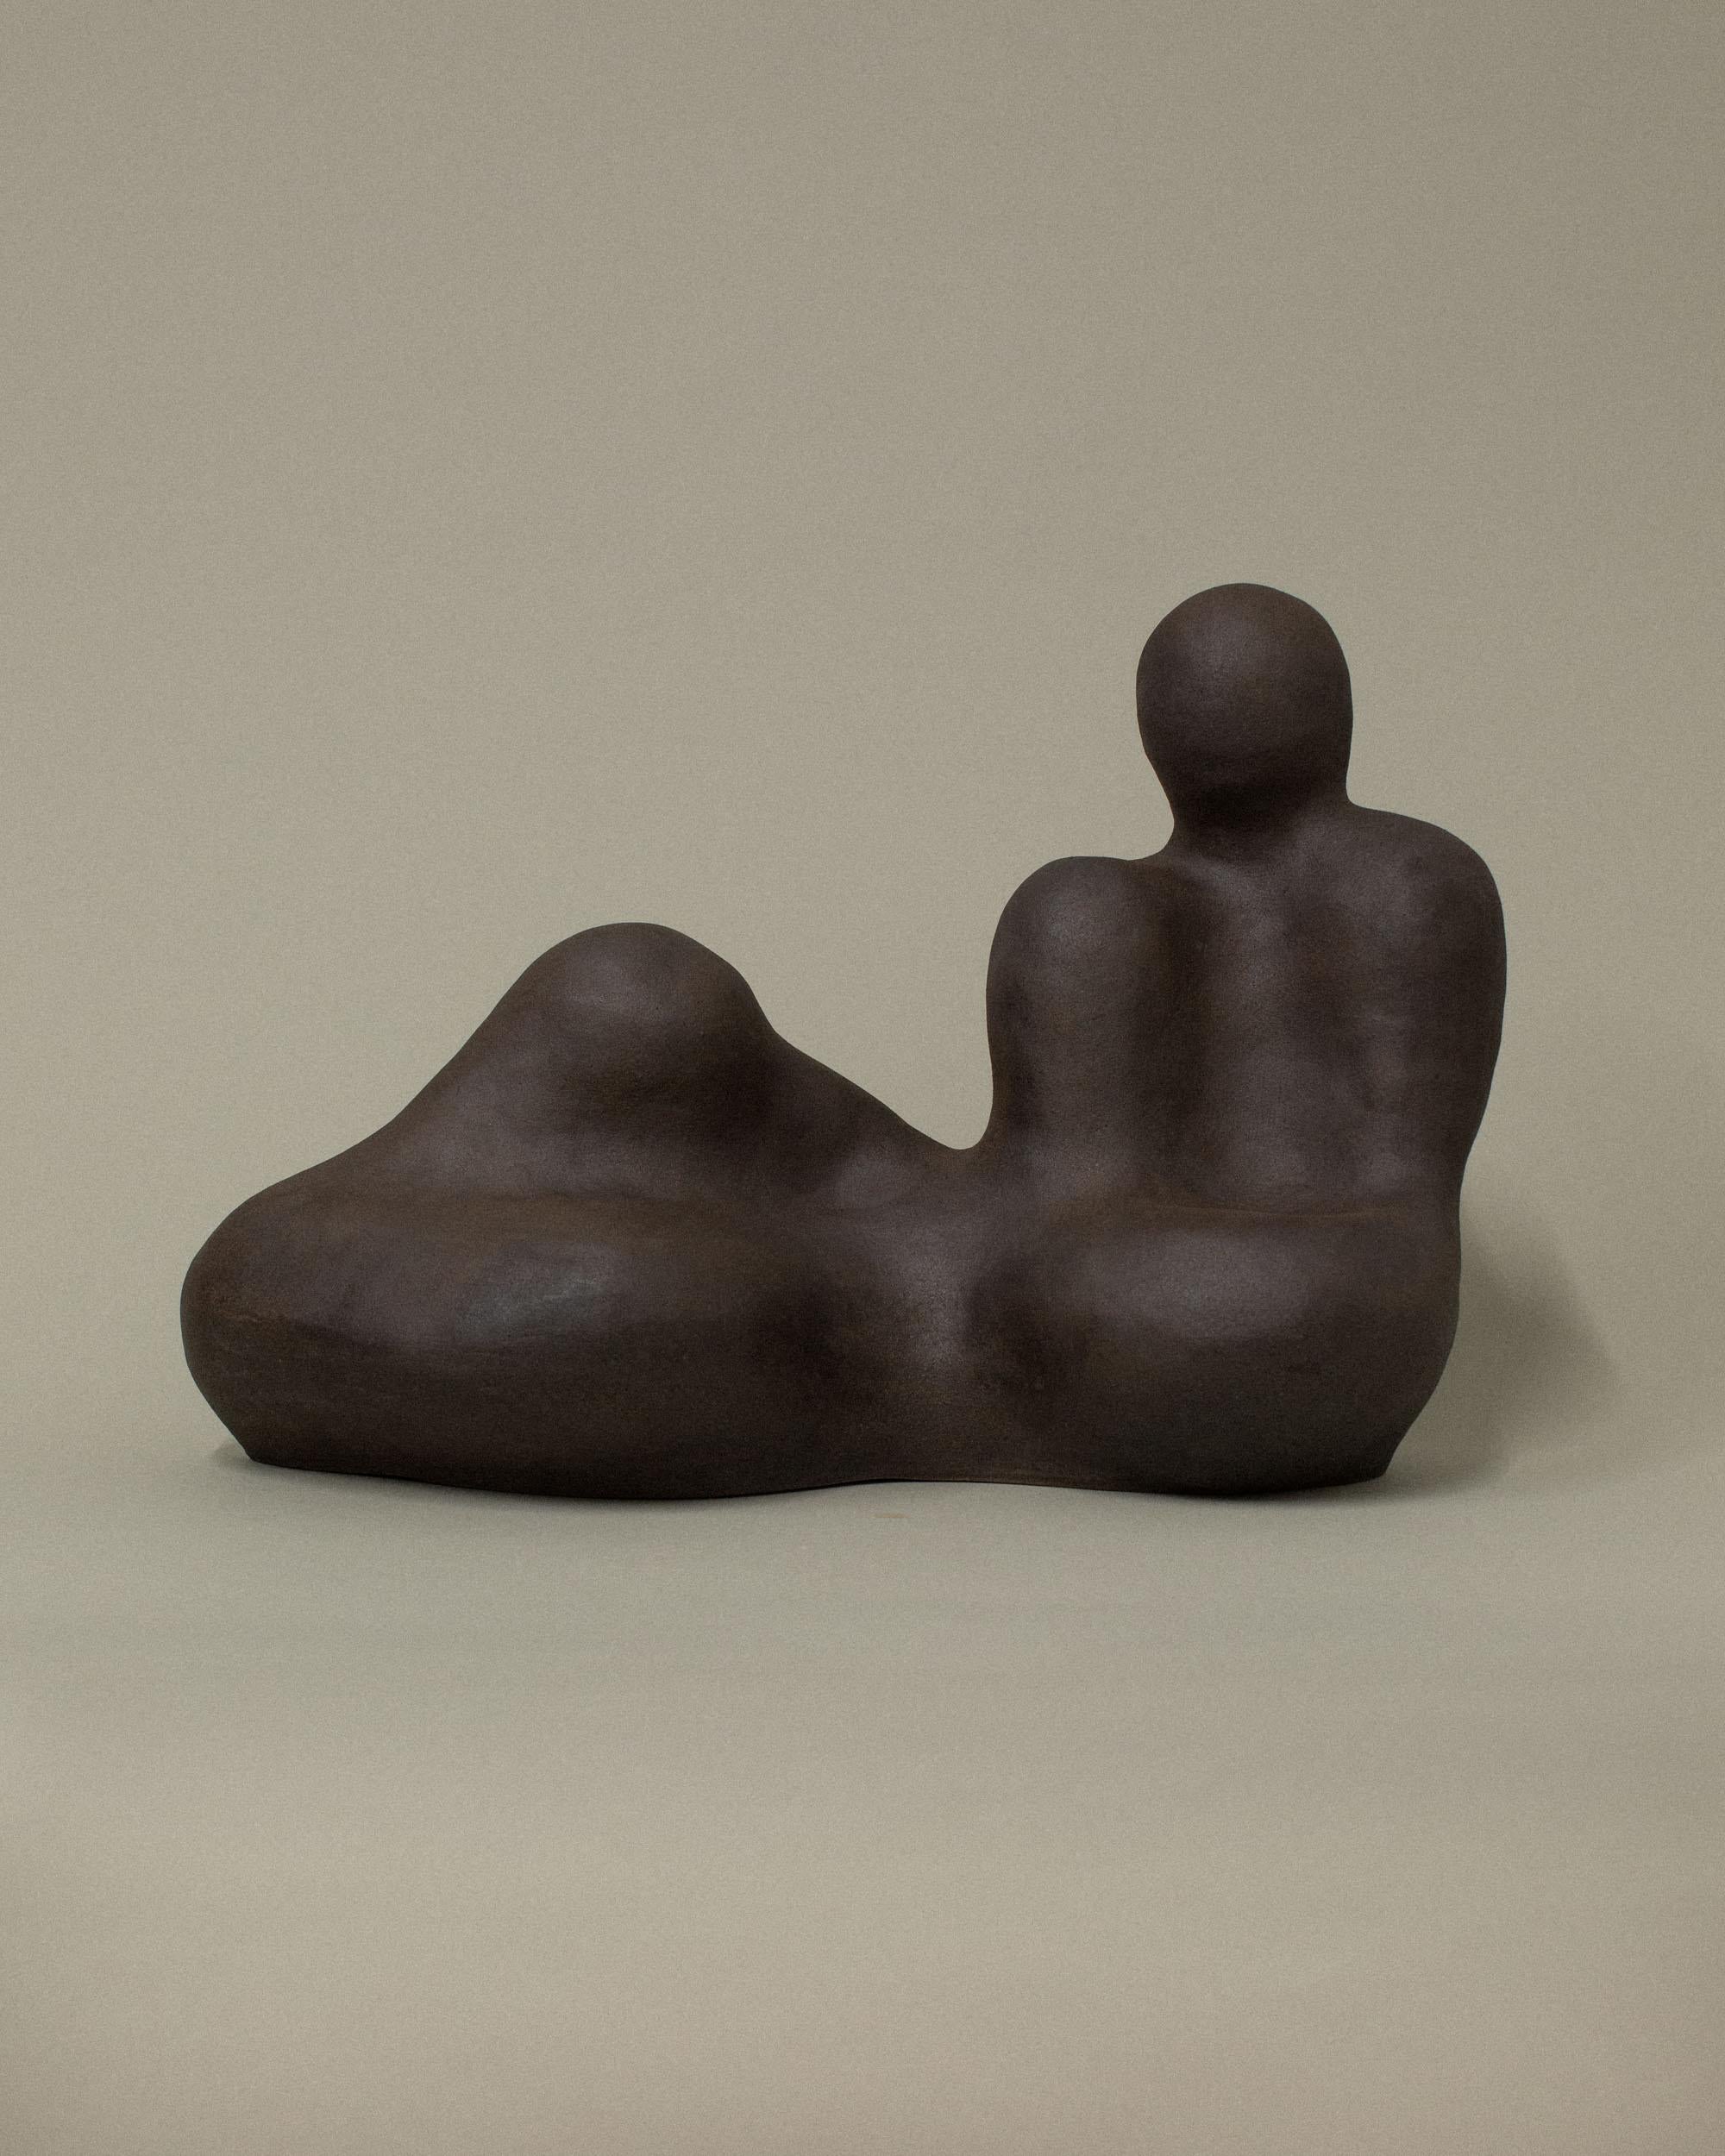 Dark Brown OM Sculpture by Common Body
Dimensions: W 38 x D 31 x H 59 cm
Materials: Dark Brown Stoneware

Common body is a sculpture and interior object studio founded by nathaniel kyung smith, an artist whose passion lies in the intersection of art